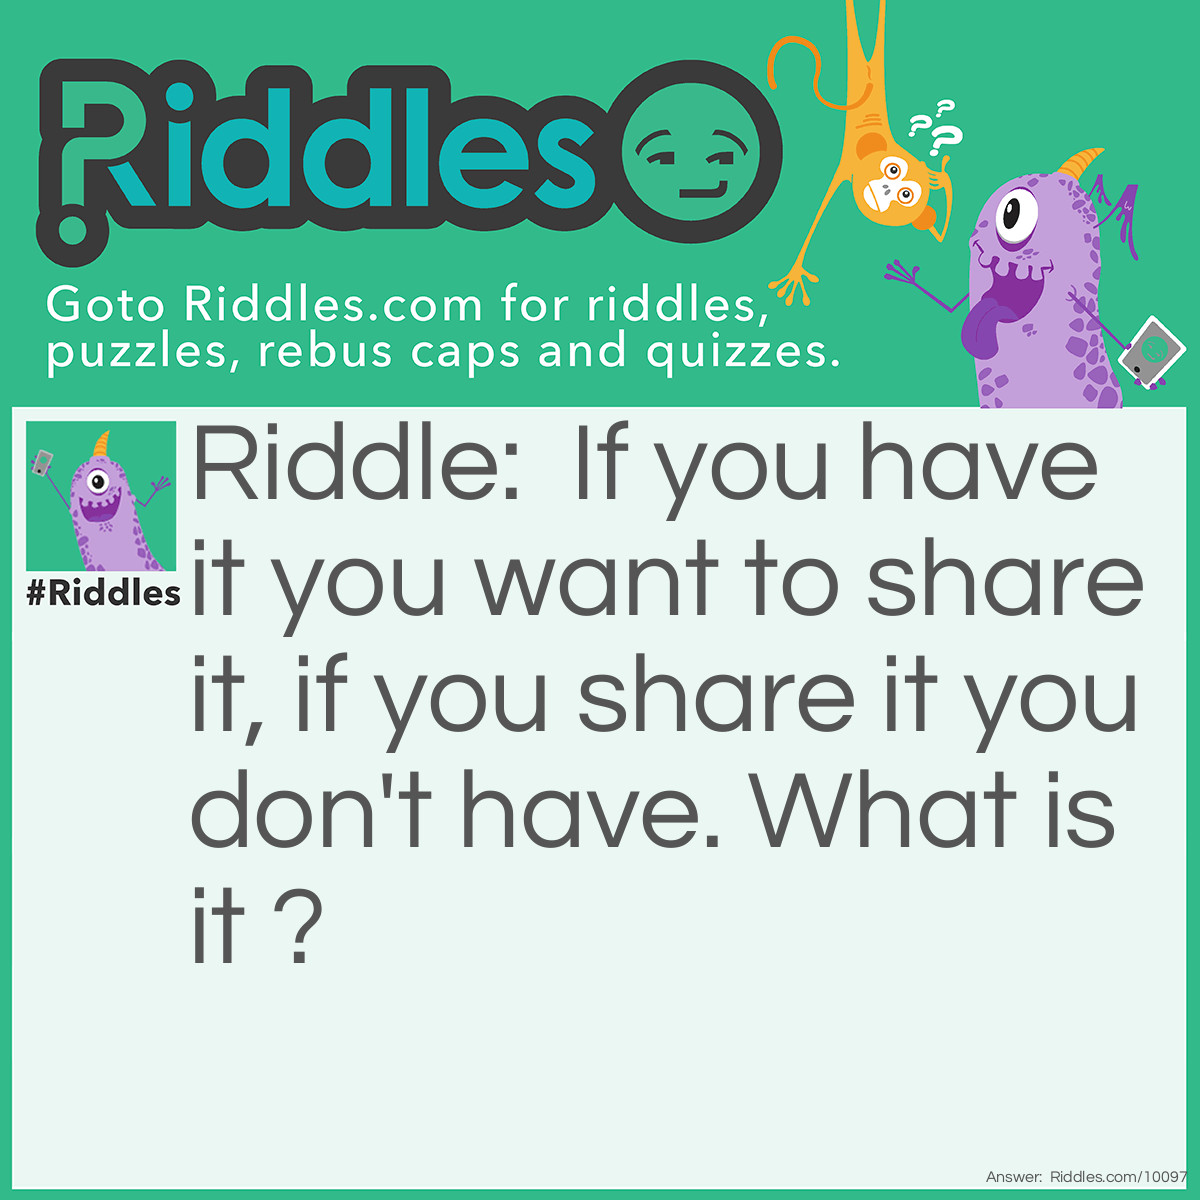 Riddle: If you have it you want to share it, if you share it you don't have. What is it ? Answer: A secret